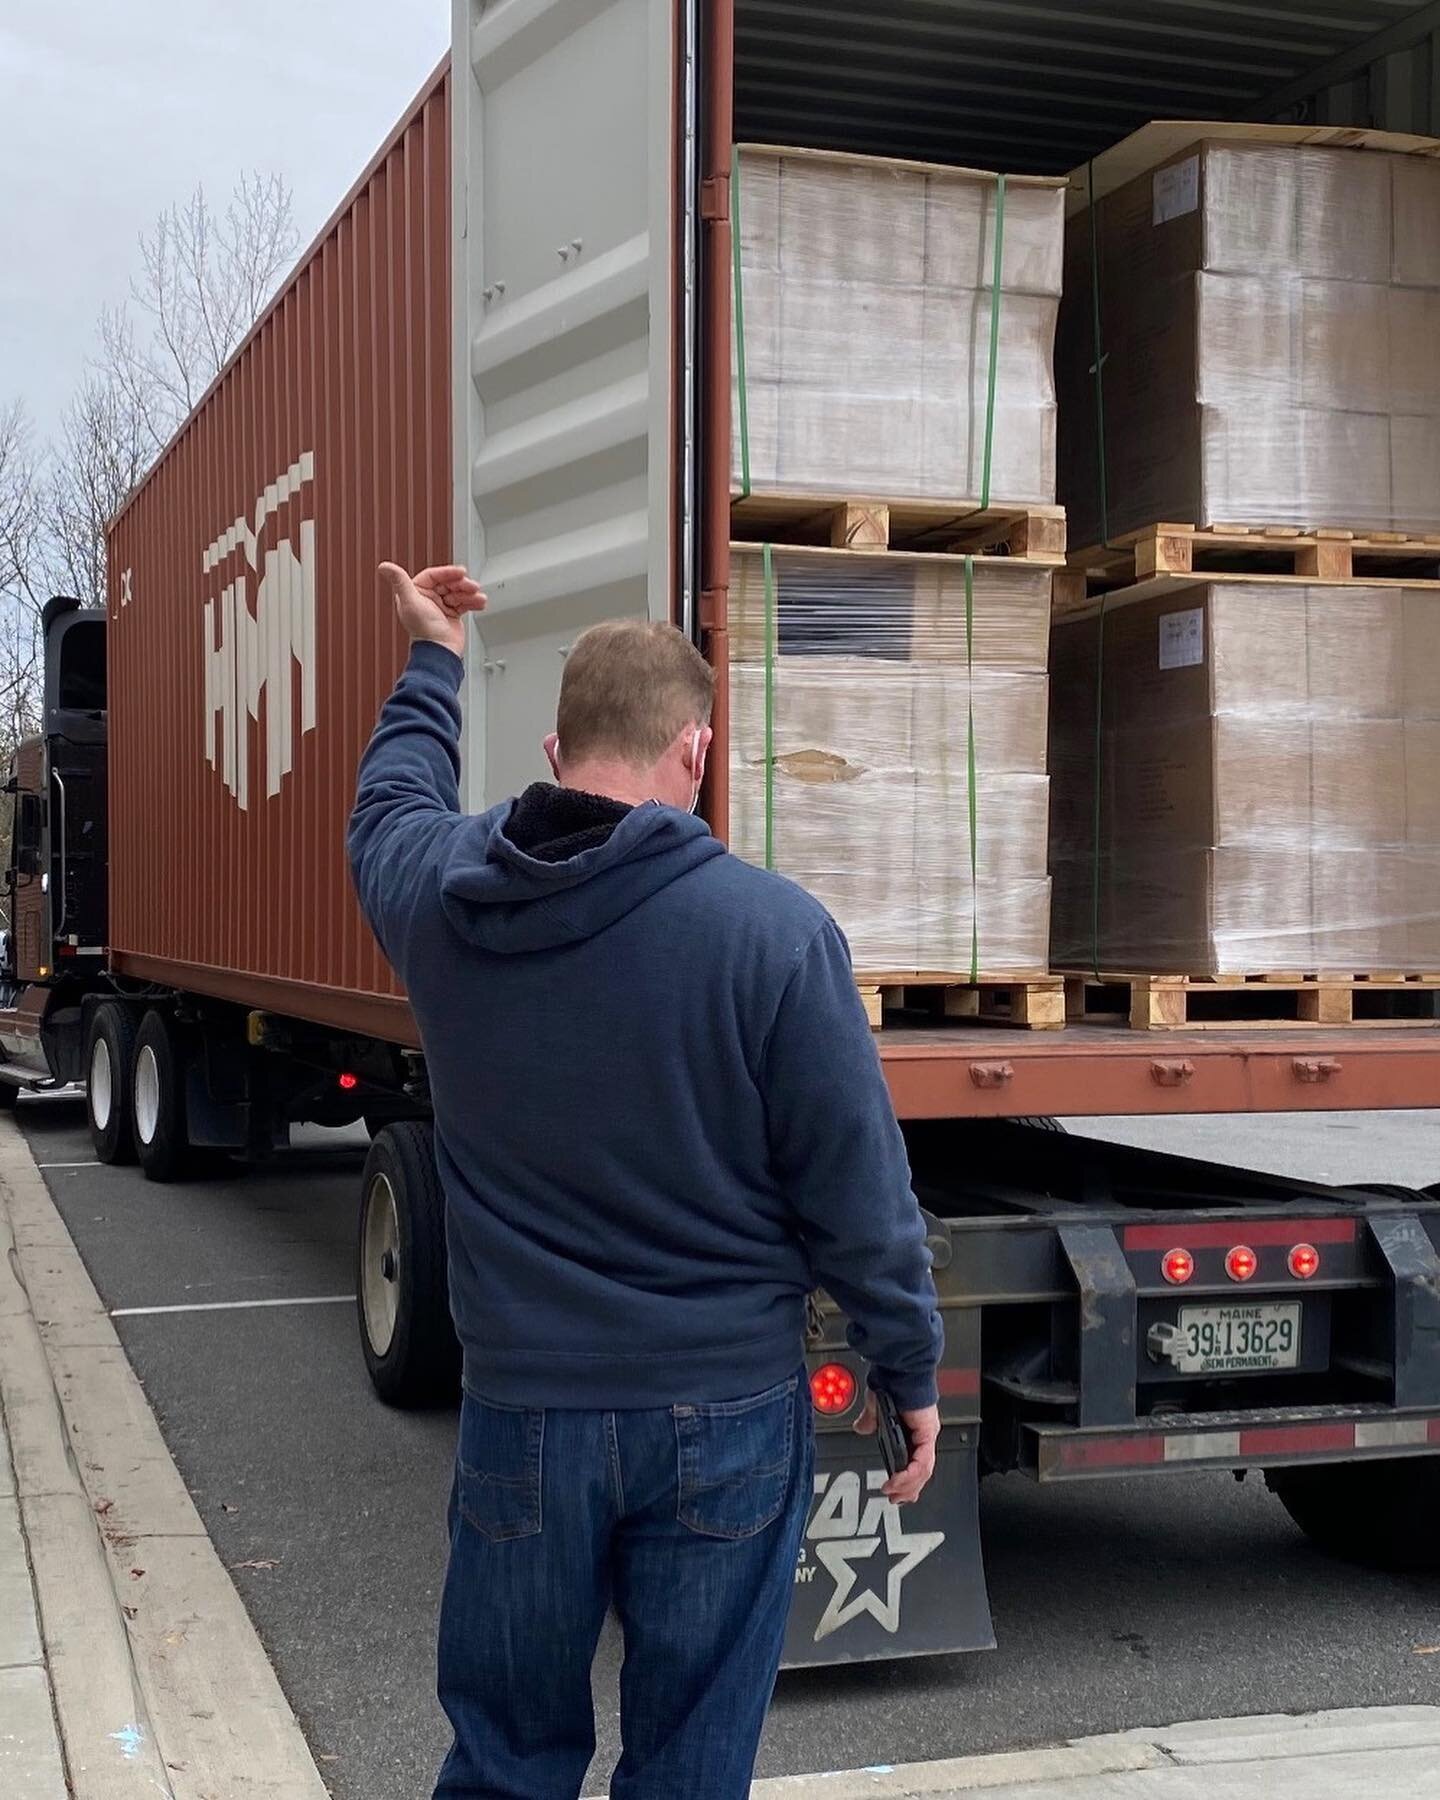 When the pandemic hit I was anxiously awaiting our 40 ft container to arrive from China. Times were uncertain, we were in lockdown, masked and had no idea what the future held for us as we unloaded this 40 ft container full of Travel Journals for Kid